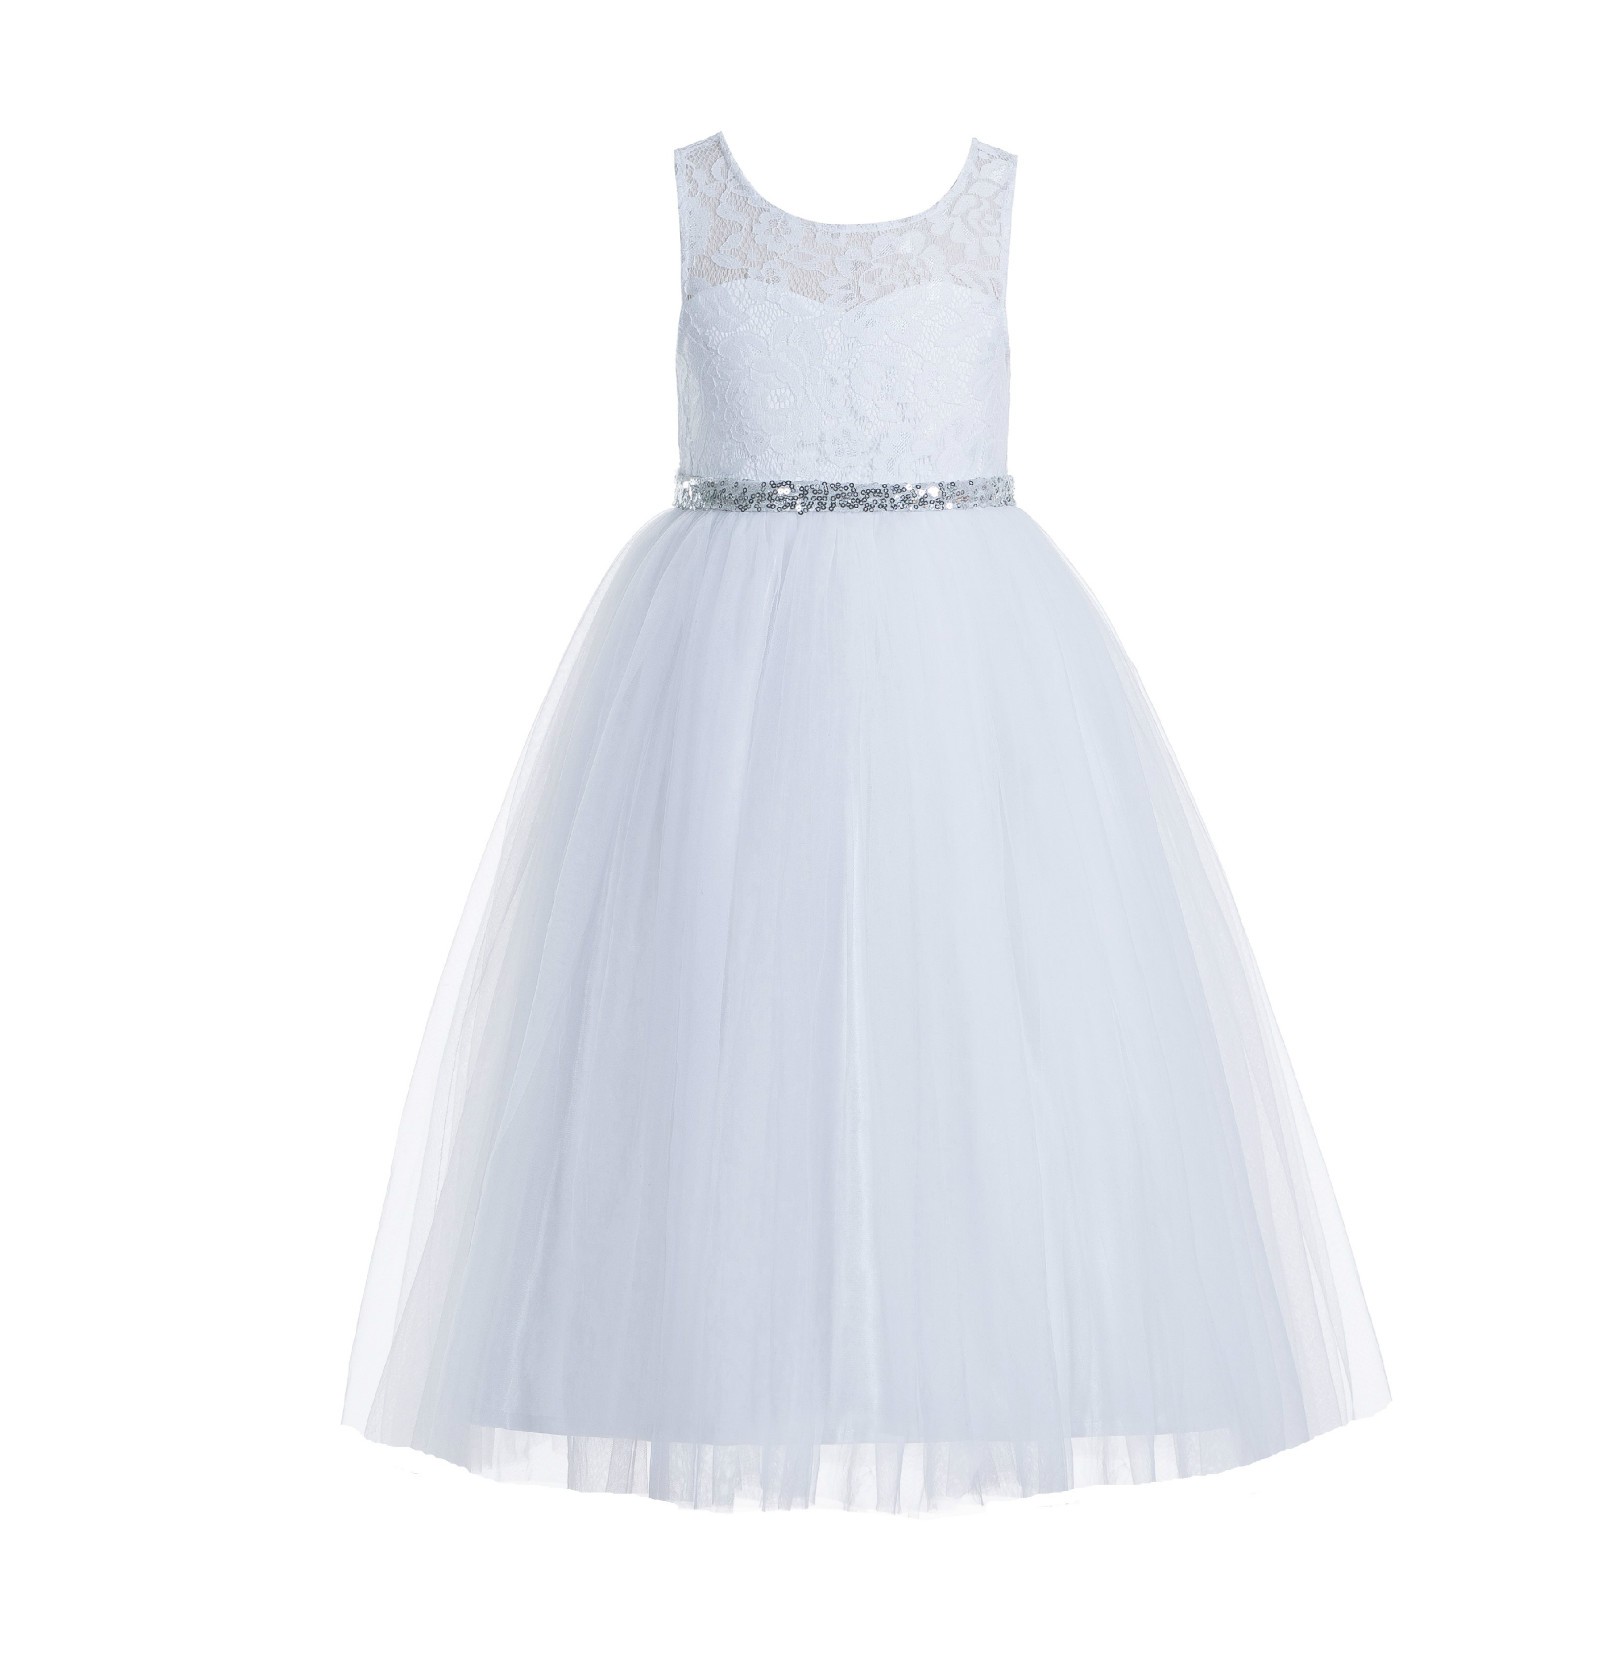 White / Silver Lace Tulle Scoop Neck Keyhole Back A-Line Flower Girl Dress 178